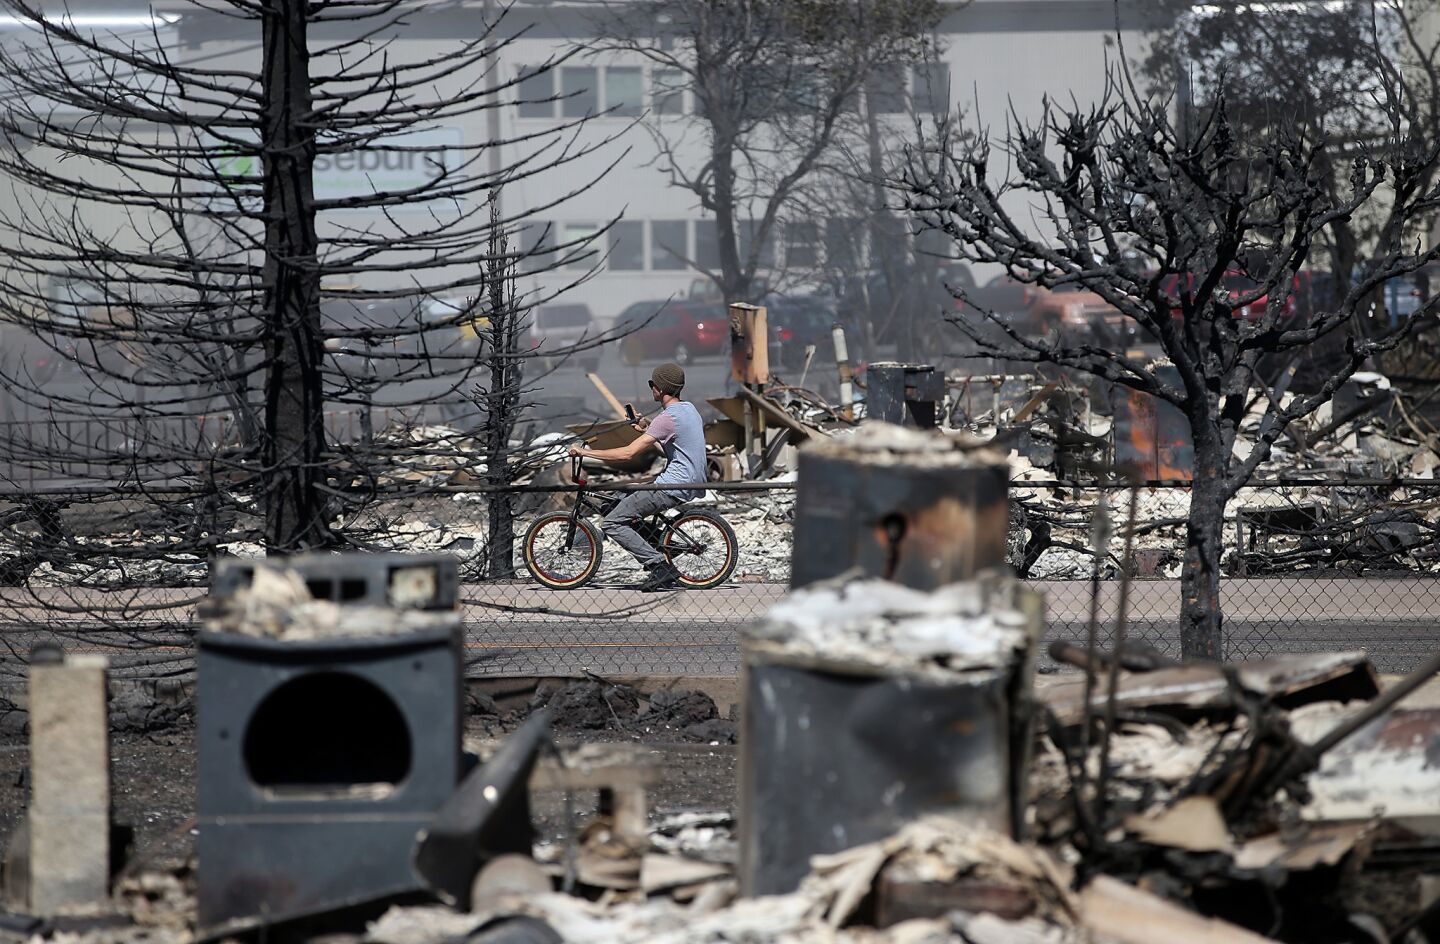 A cyclist stops to take a picture of the remains of destroyed homes in Weed, Calif.